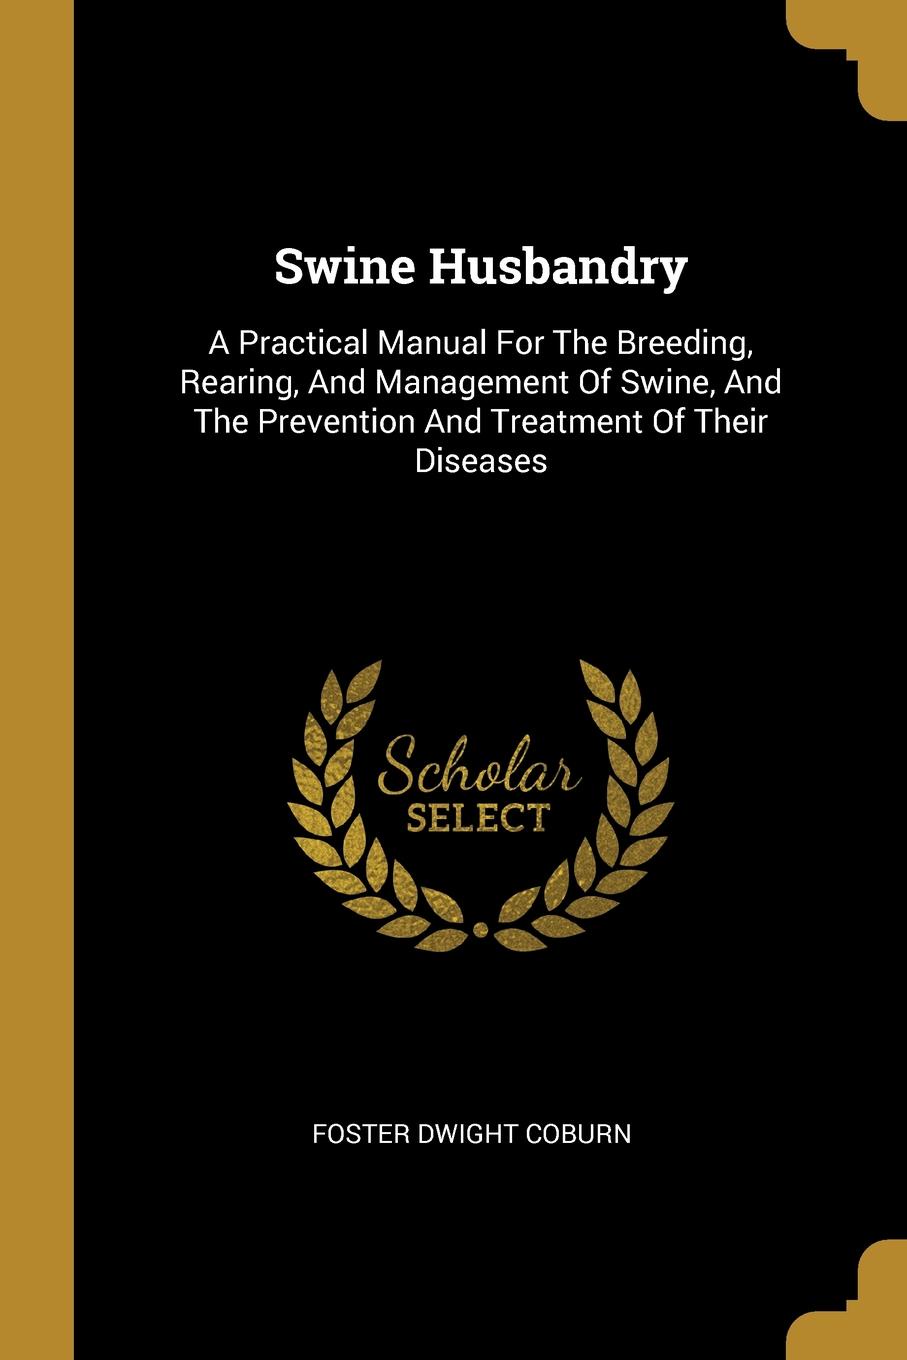 Swine Husbandry. A Practical Manual For The Breeding, Rearing, And Management Of Swine, And The Prevention And Treatment Of Their Diseases